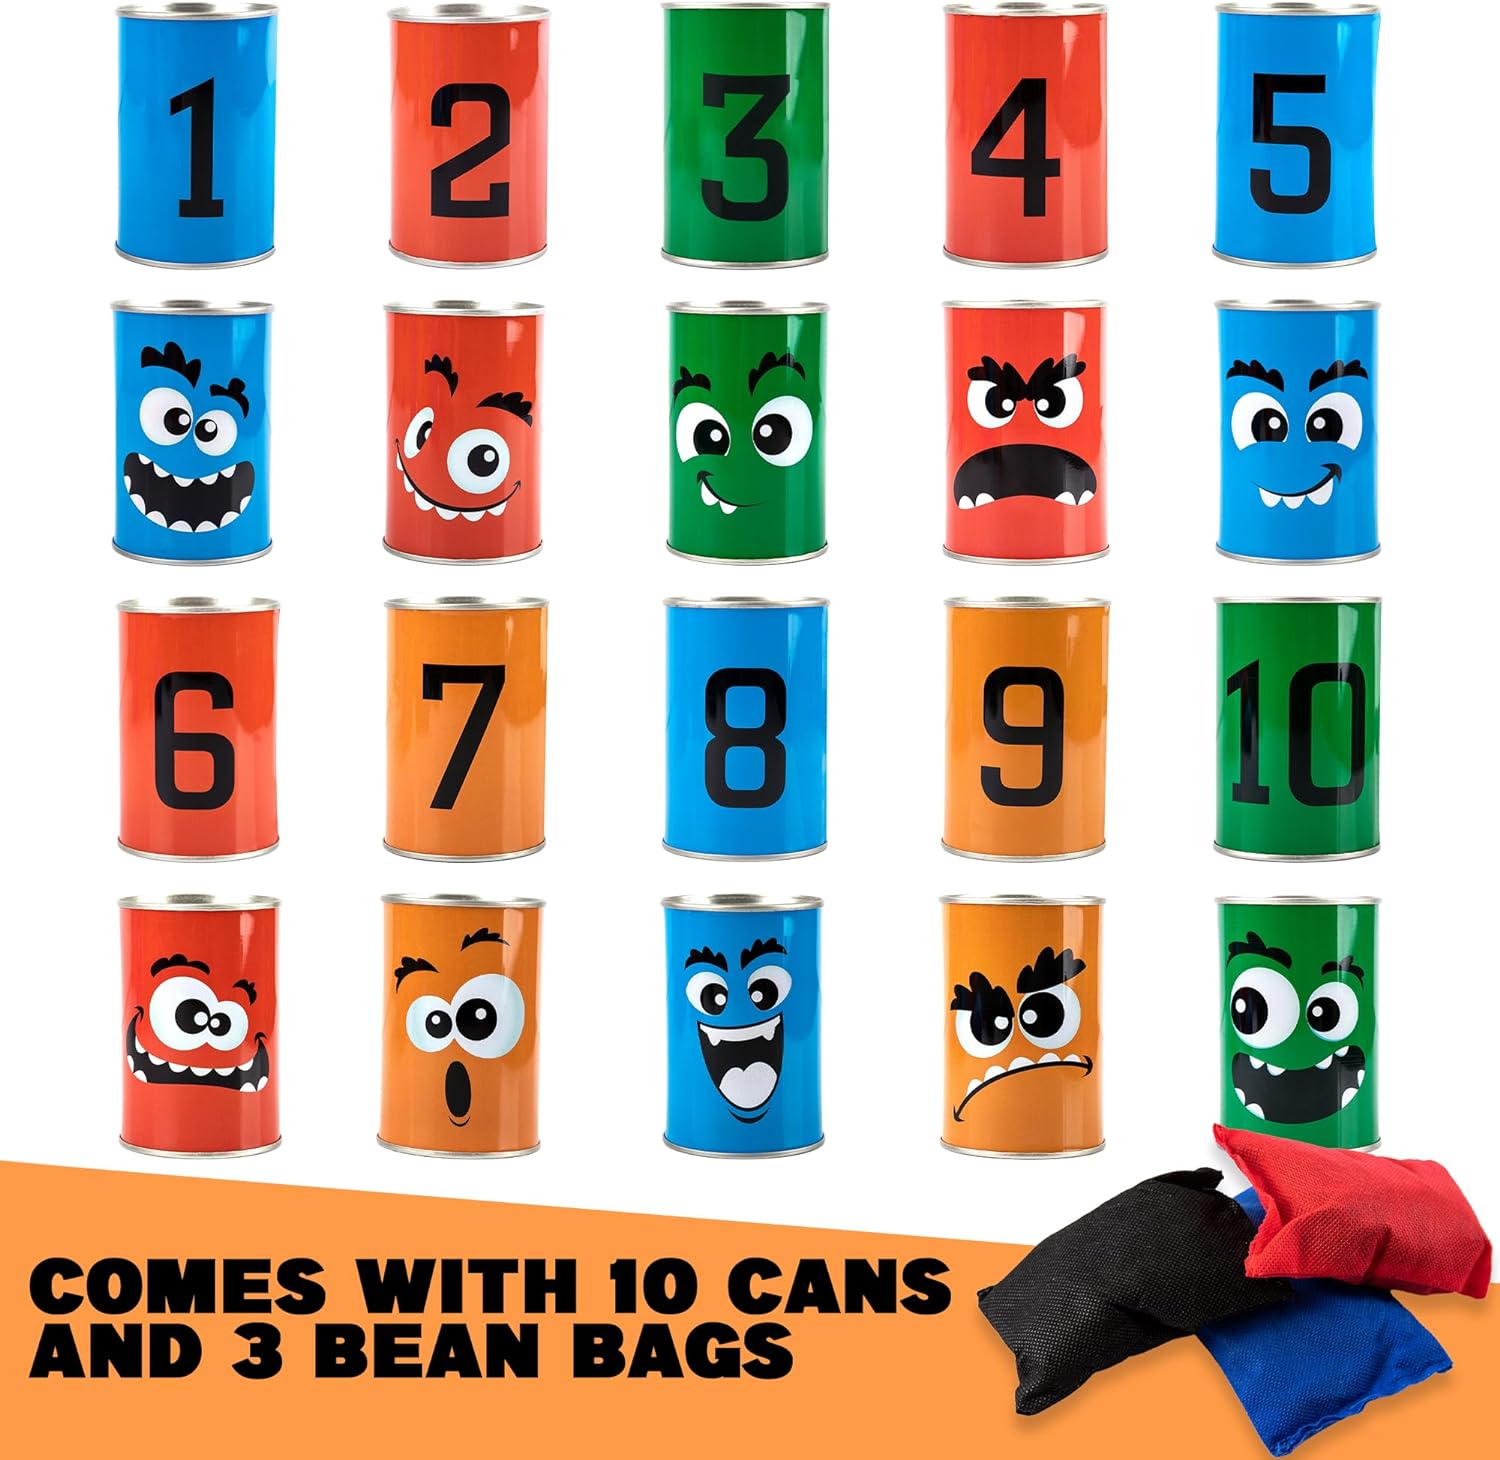 Halloween Carnival Bean Bag Toss Game - Halloween Party Game with 10 Tin Cans and 3 Bean Bags